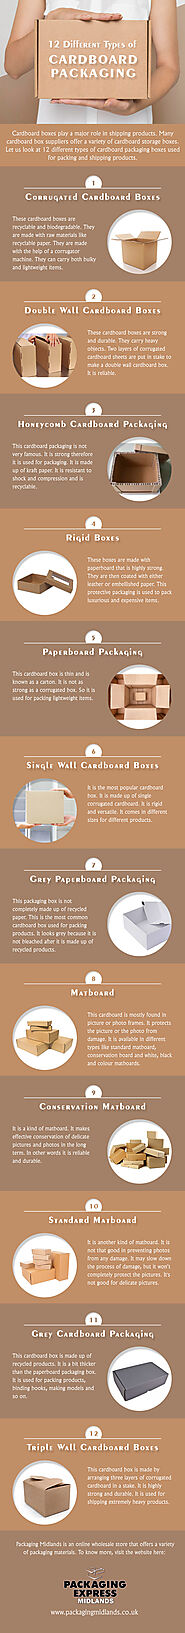 12 Different Types of Cardboard Boxes - WriteUpCafe.com